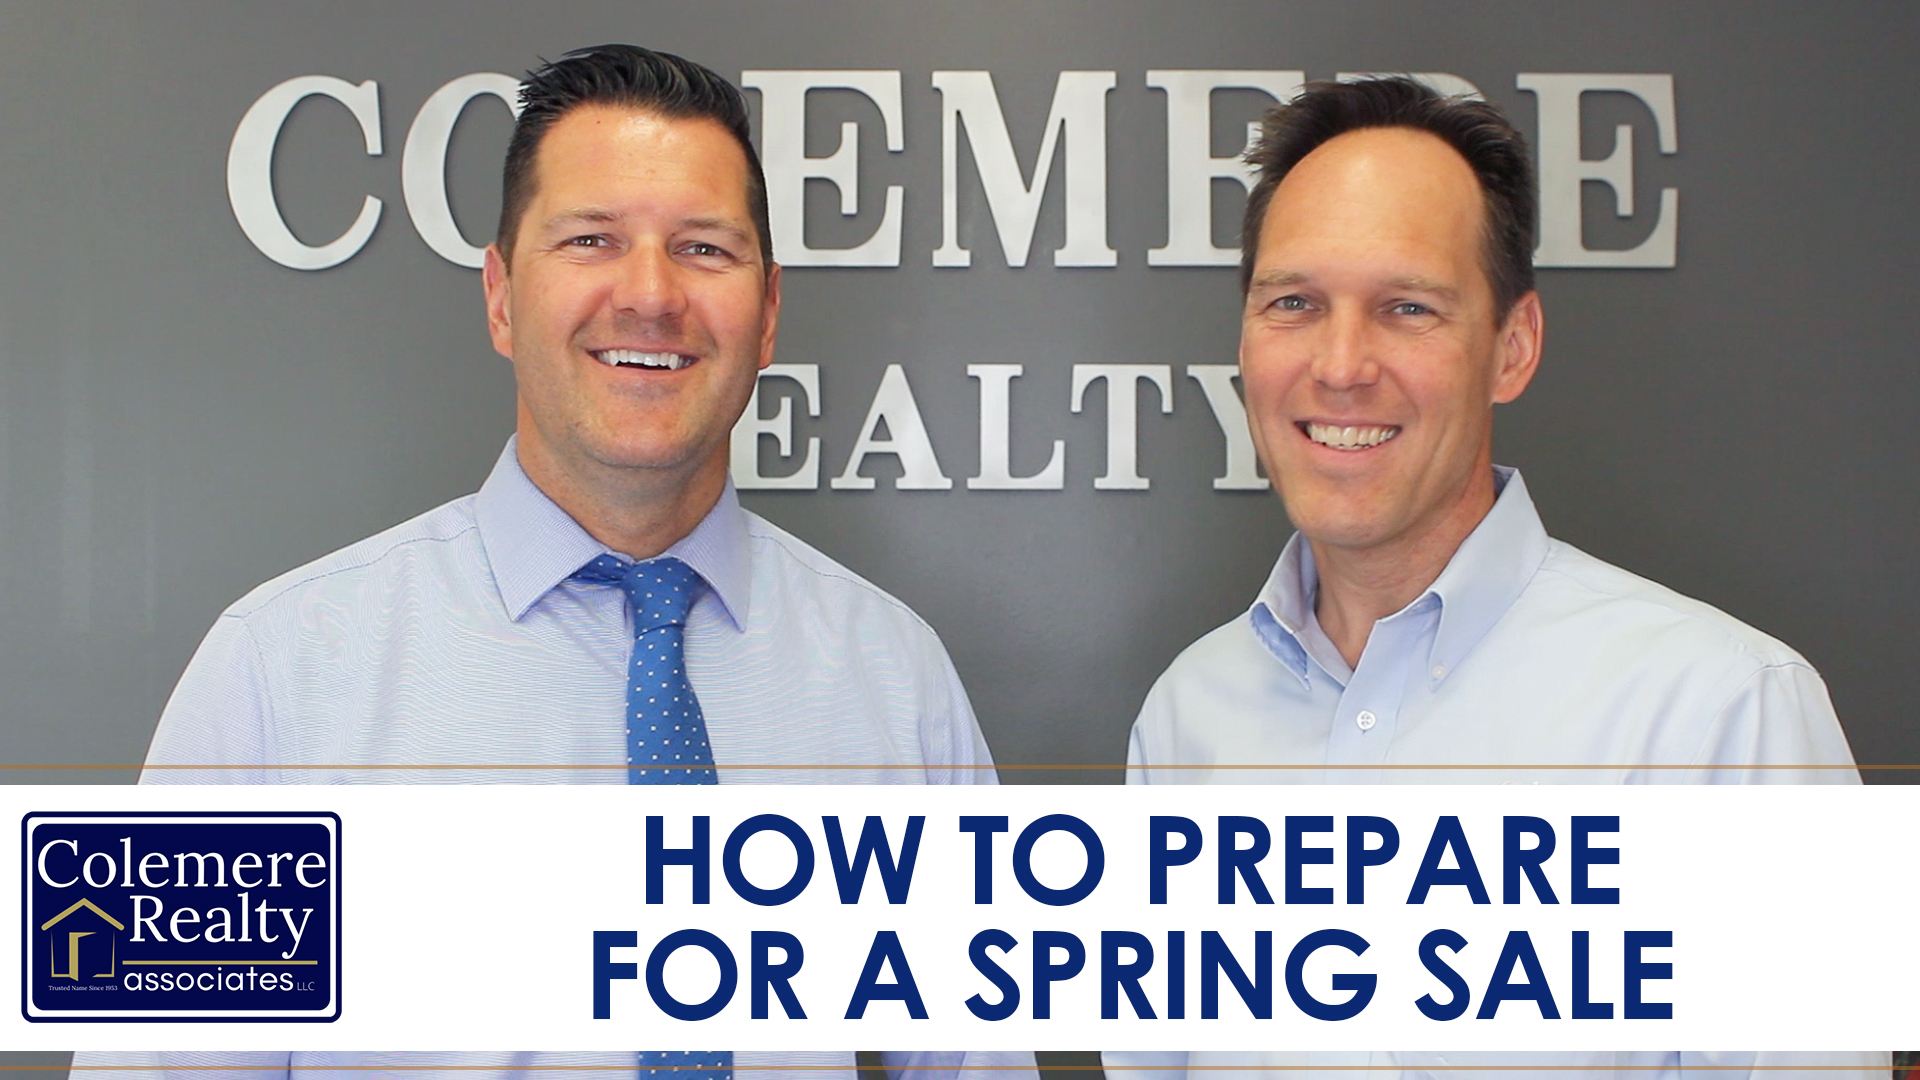 5 Steps for Preparing Your Home for a Spring Sale